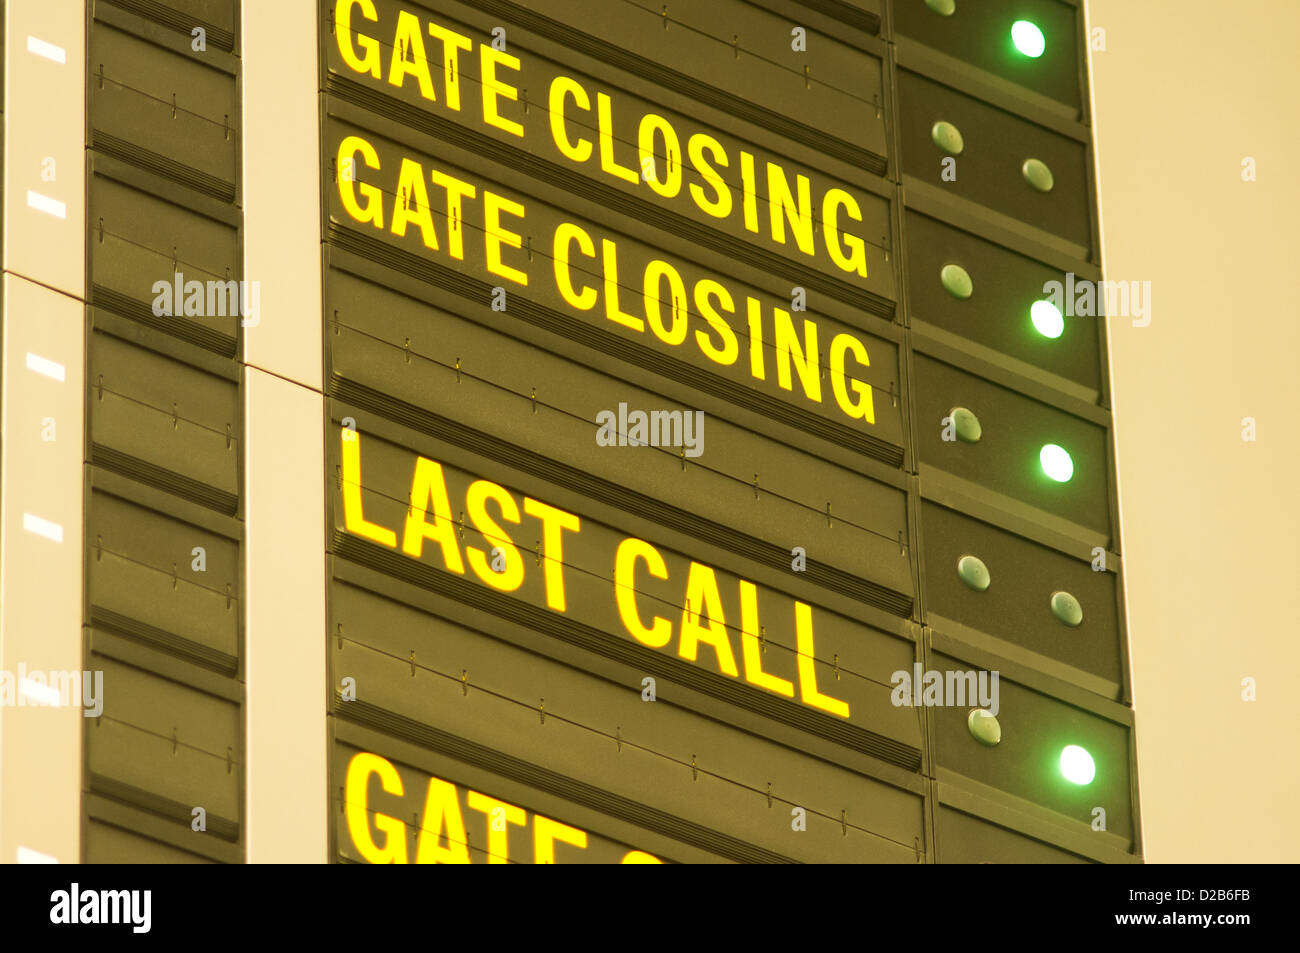 last call and gate closing message in airport flight information board. Stock Photo